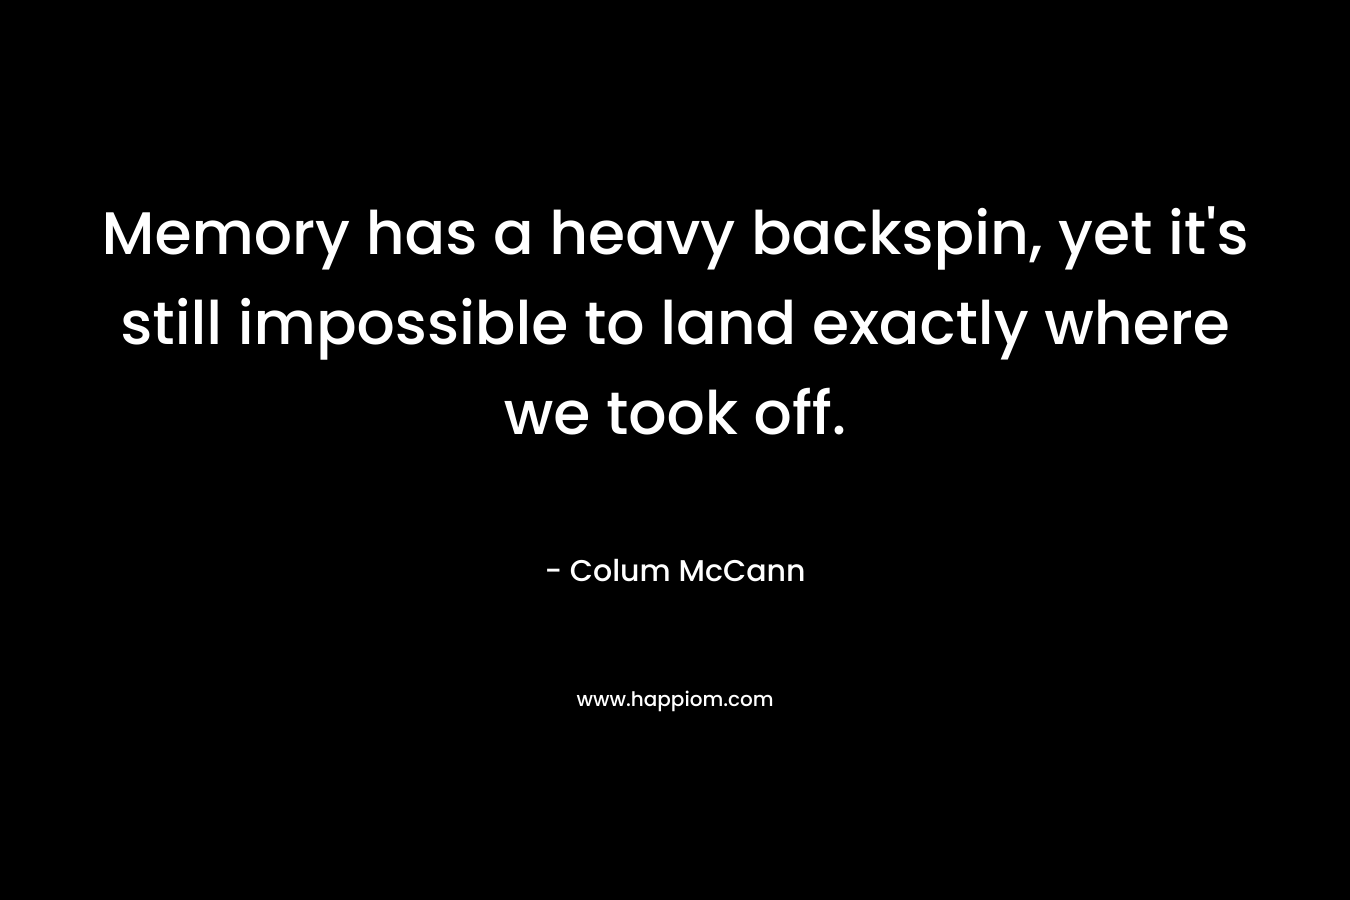 Memory has a heavy backspin, yet it's still impossible to land exactly where we took off.